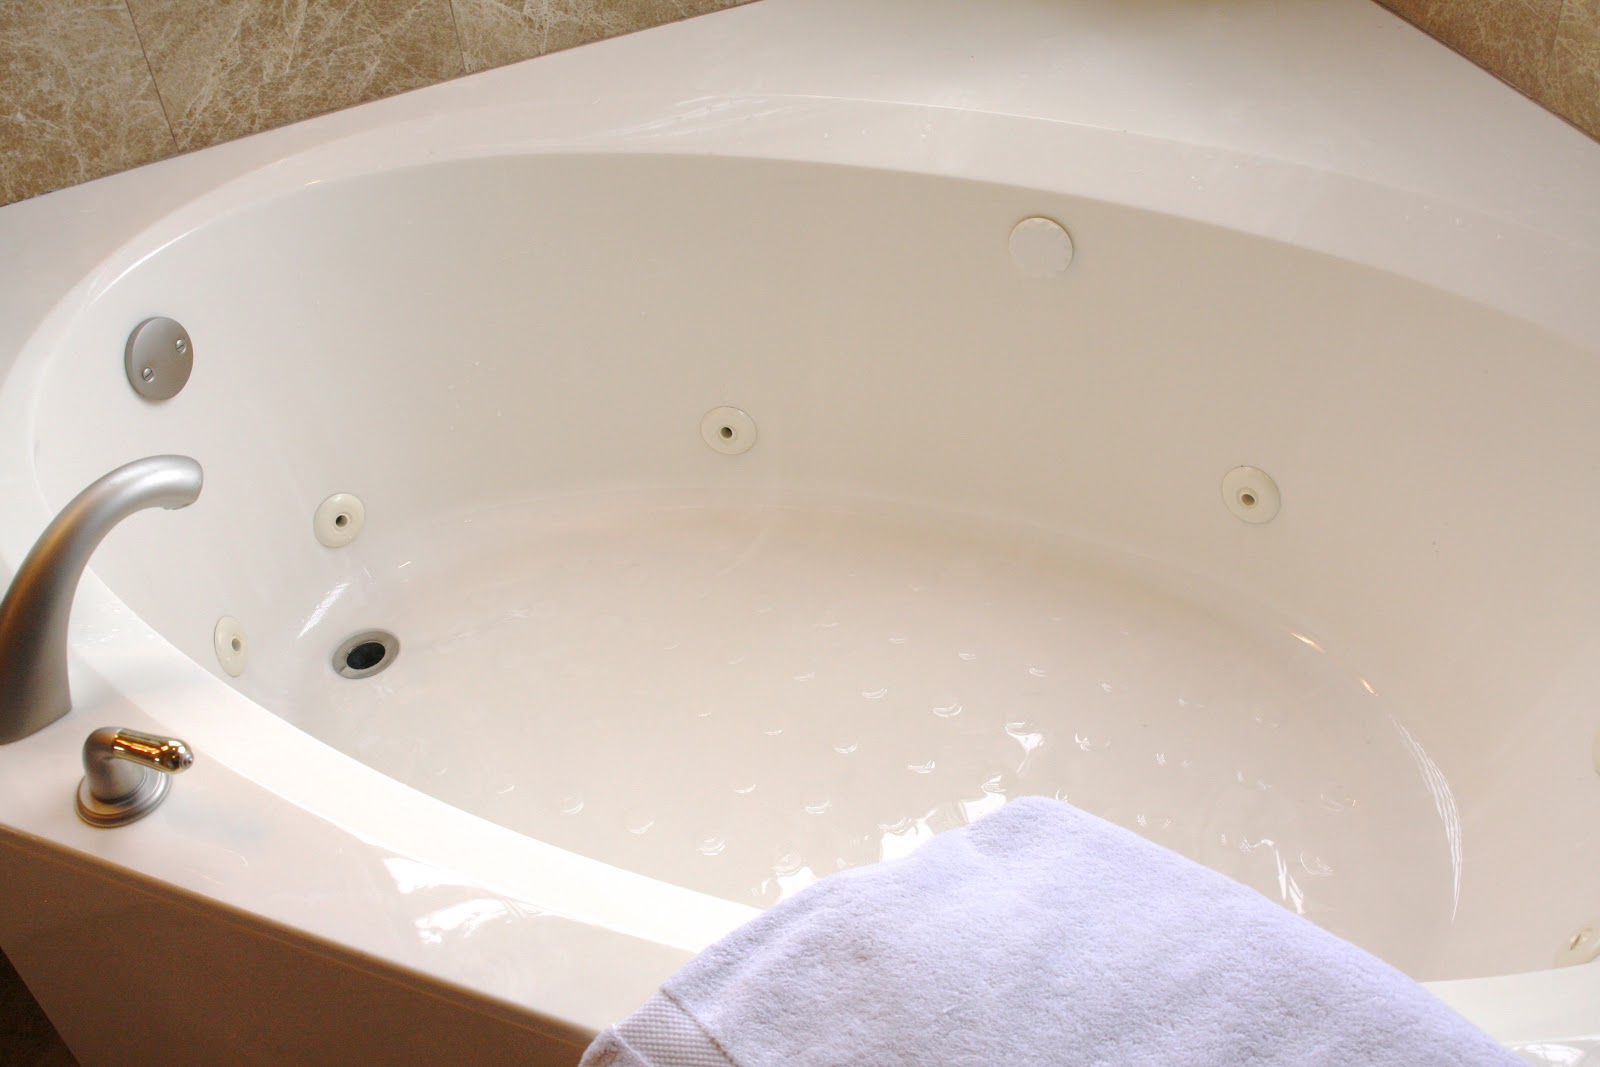 How To Clean Whirlpool Tub Jets, How To Clean Jacuzzi Bathtub Jets